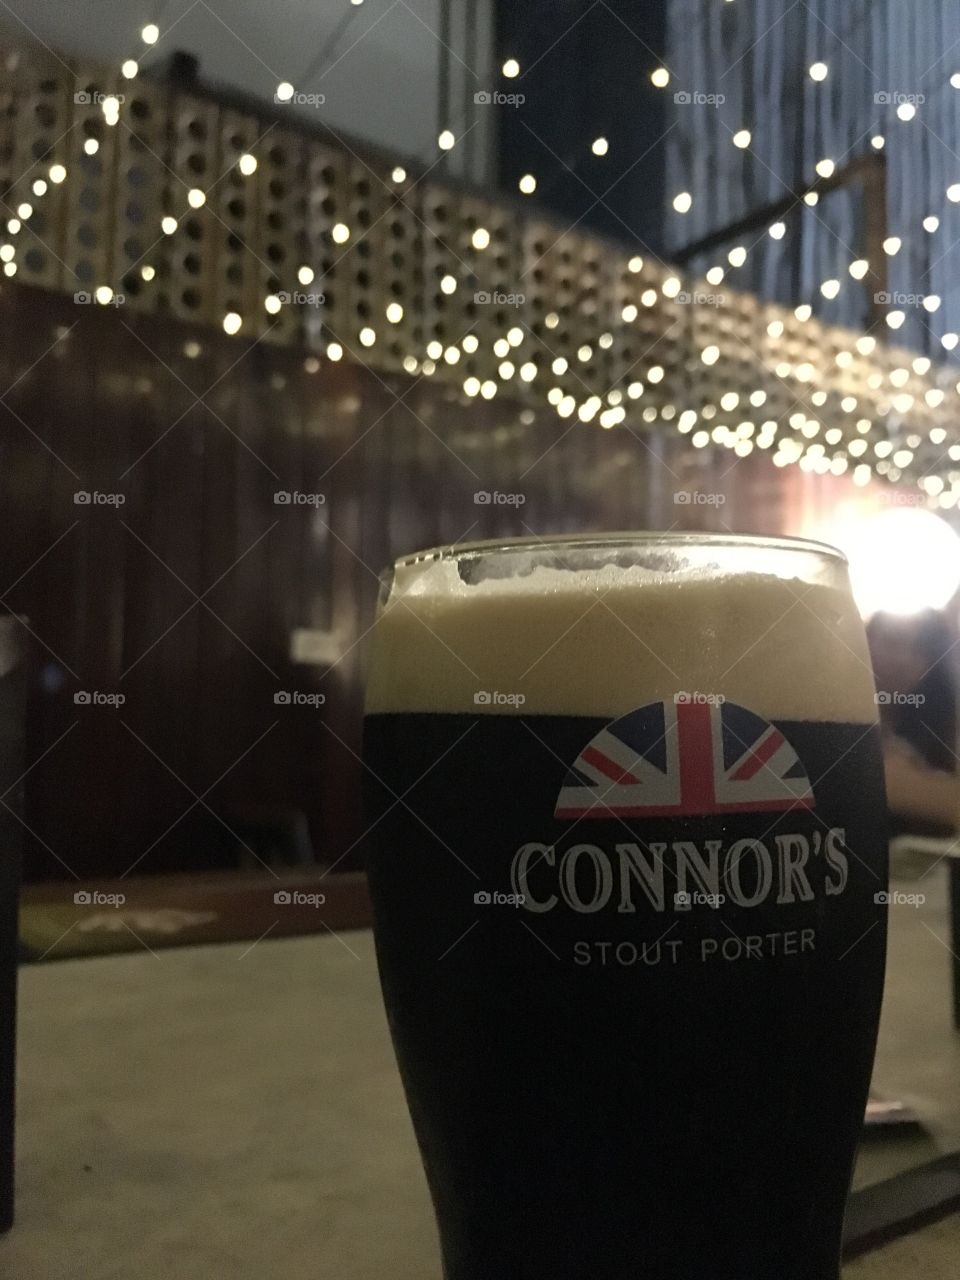 Friday night chill; what can be more better than a glass of connors